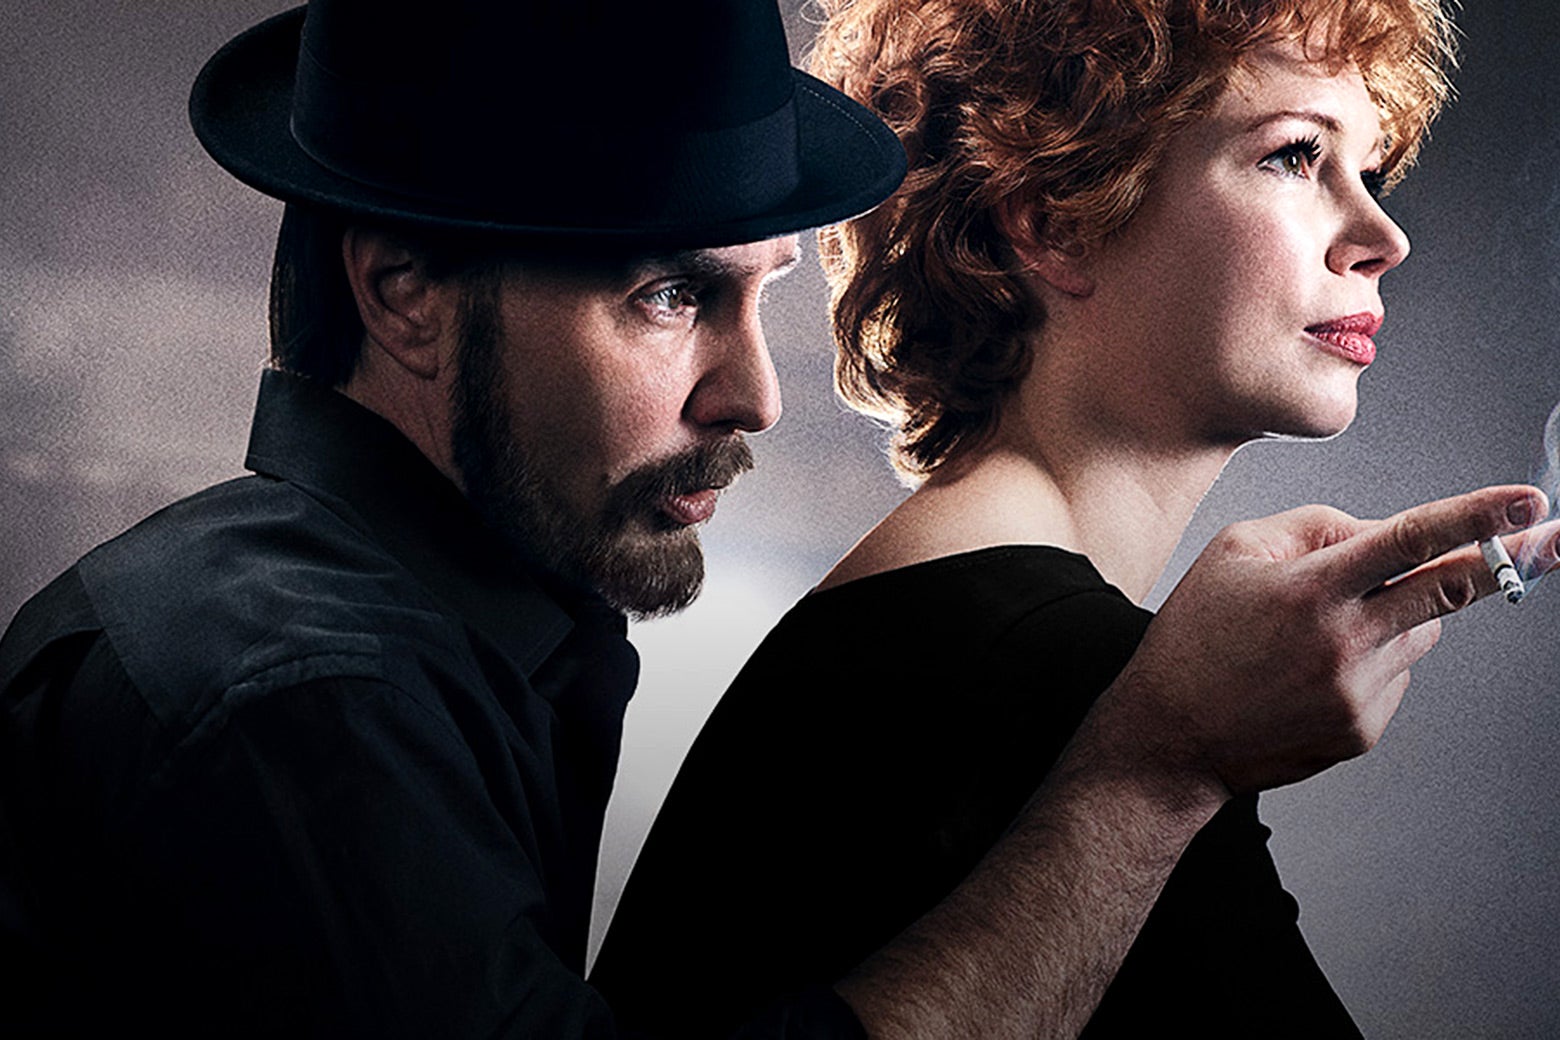 A hat-clad Sam Rockwell, as Bob Fosse, leans over Michelle Williams, as Gwen Verdon, gesturing off-camera over her shoulder with a hand holding a lit cigarette.